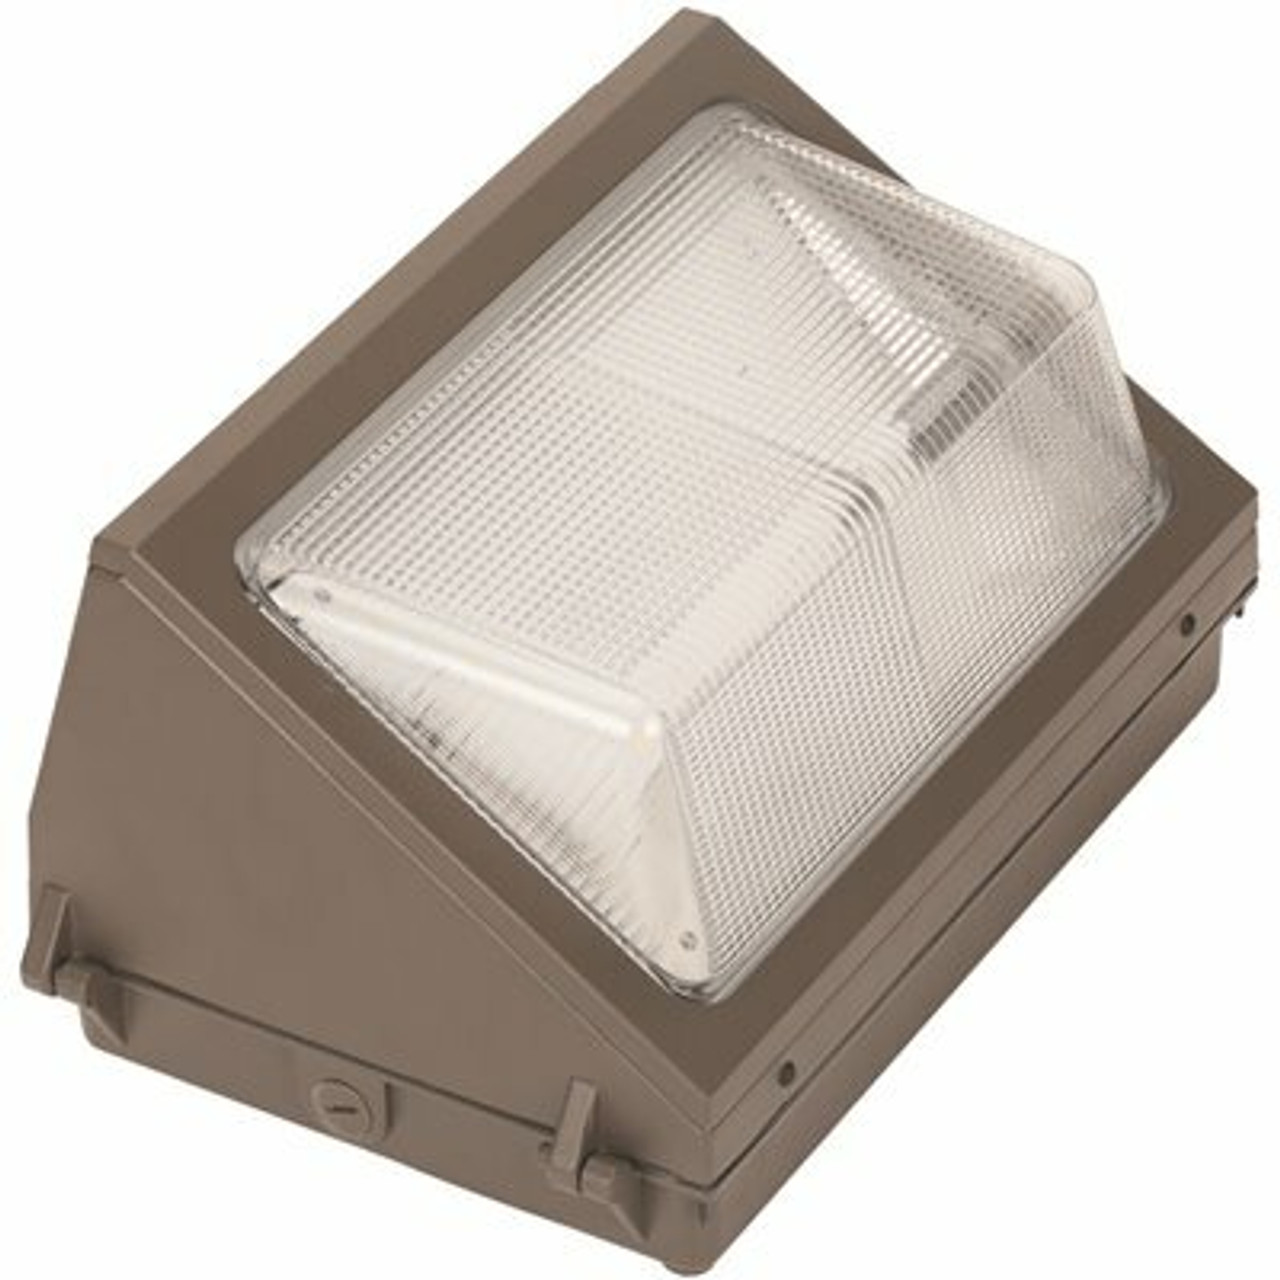 Simply Conserve 250-Watt Mh Equivalent Integrated Led Bronze Dusk To Dawn Wall Pack Light, 5000K